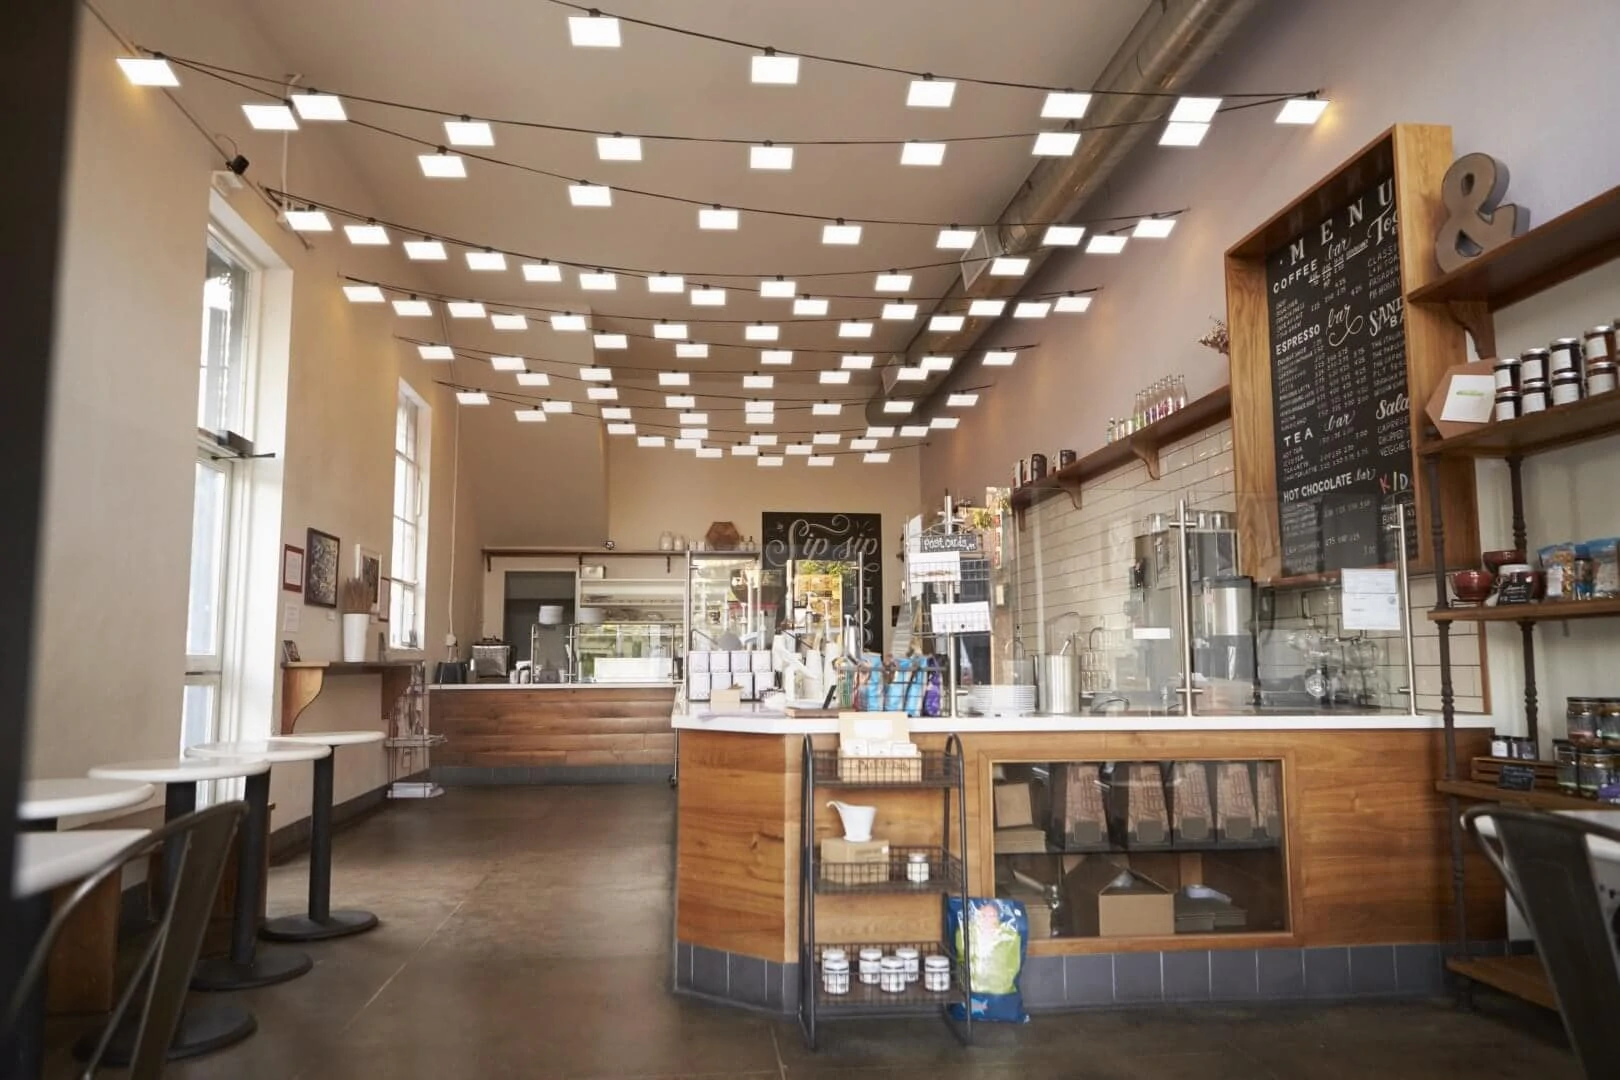 Cafe with OLED lighting panels